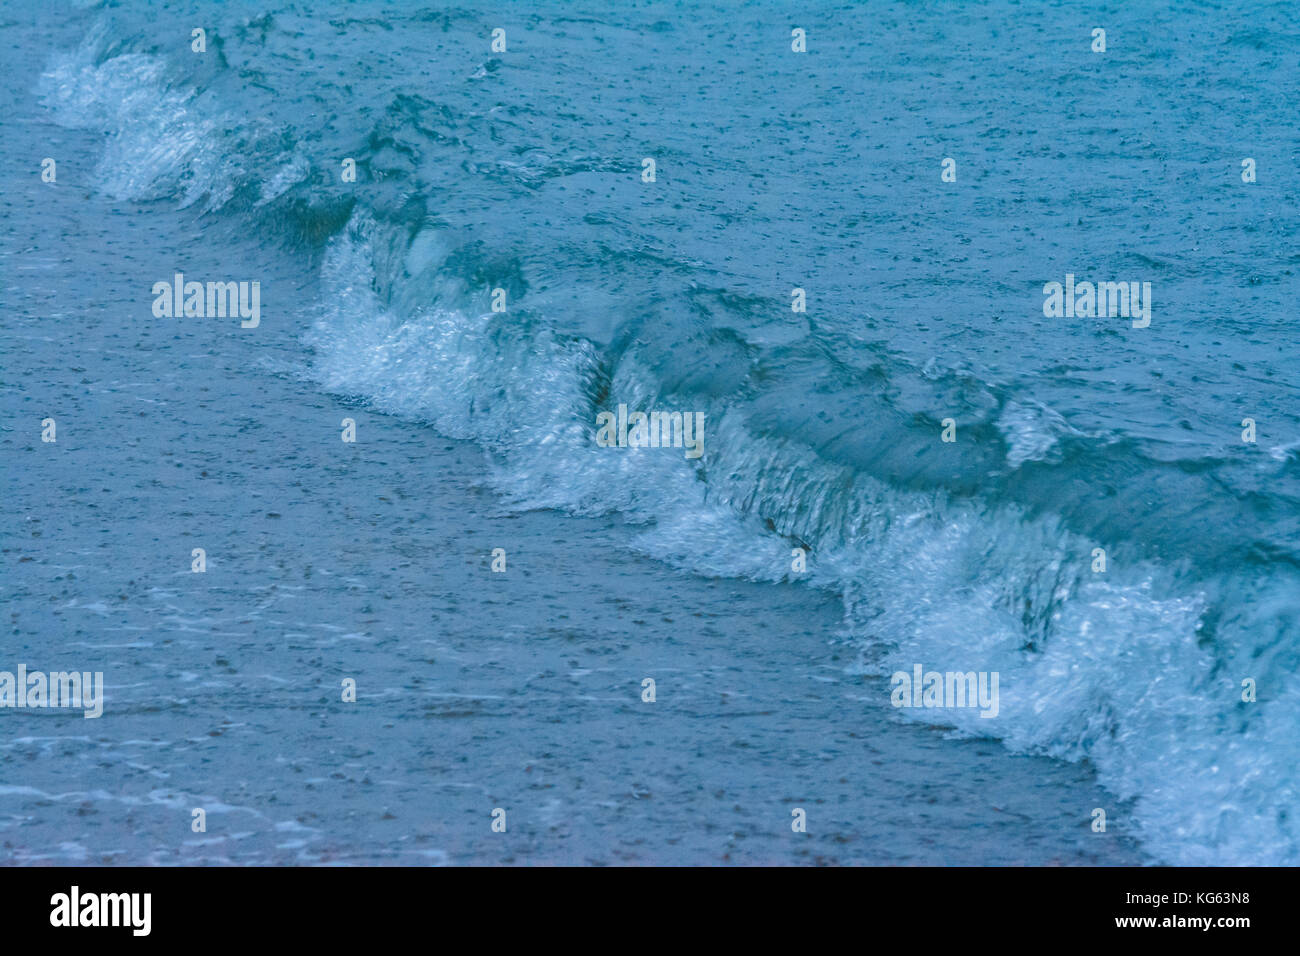 large raindrops falling on the sea during a strong thunderstorm on the Mediterranean Sea Stock Photo